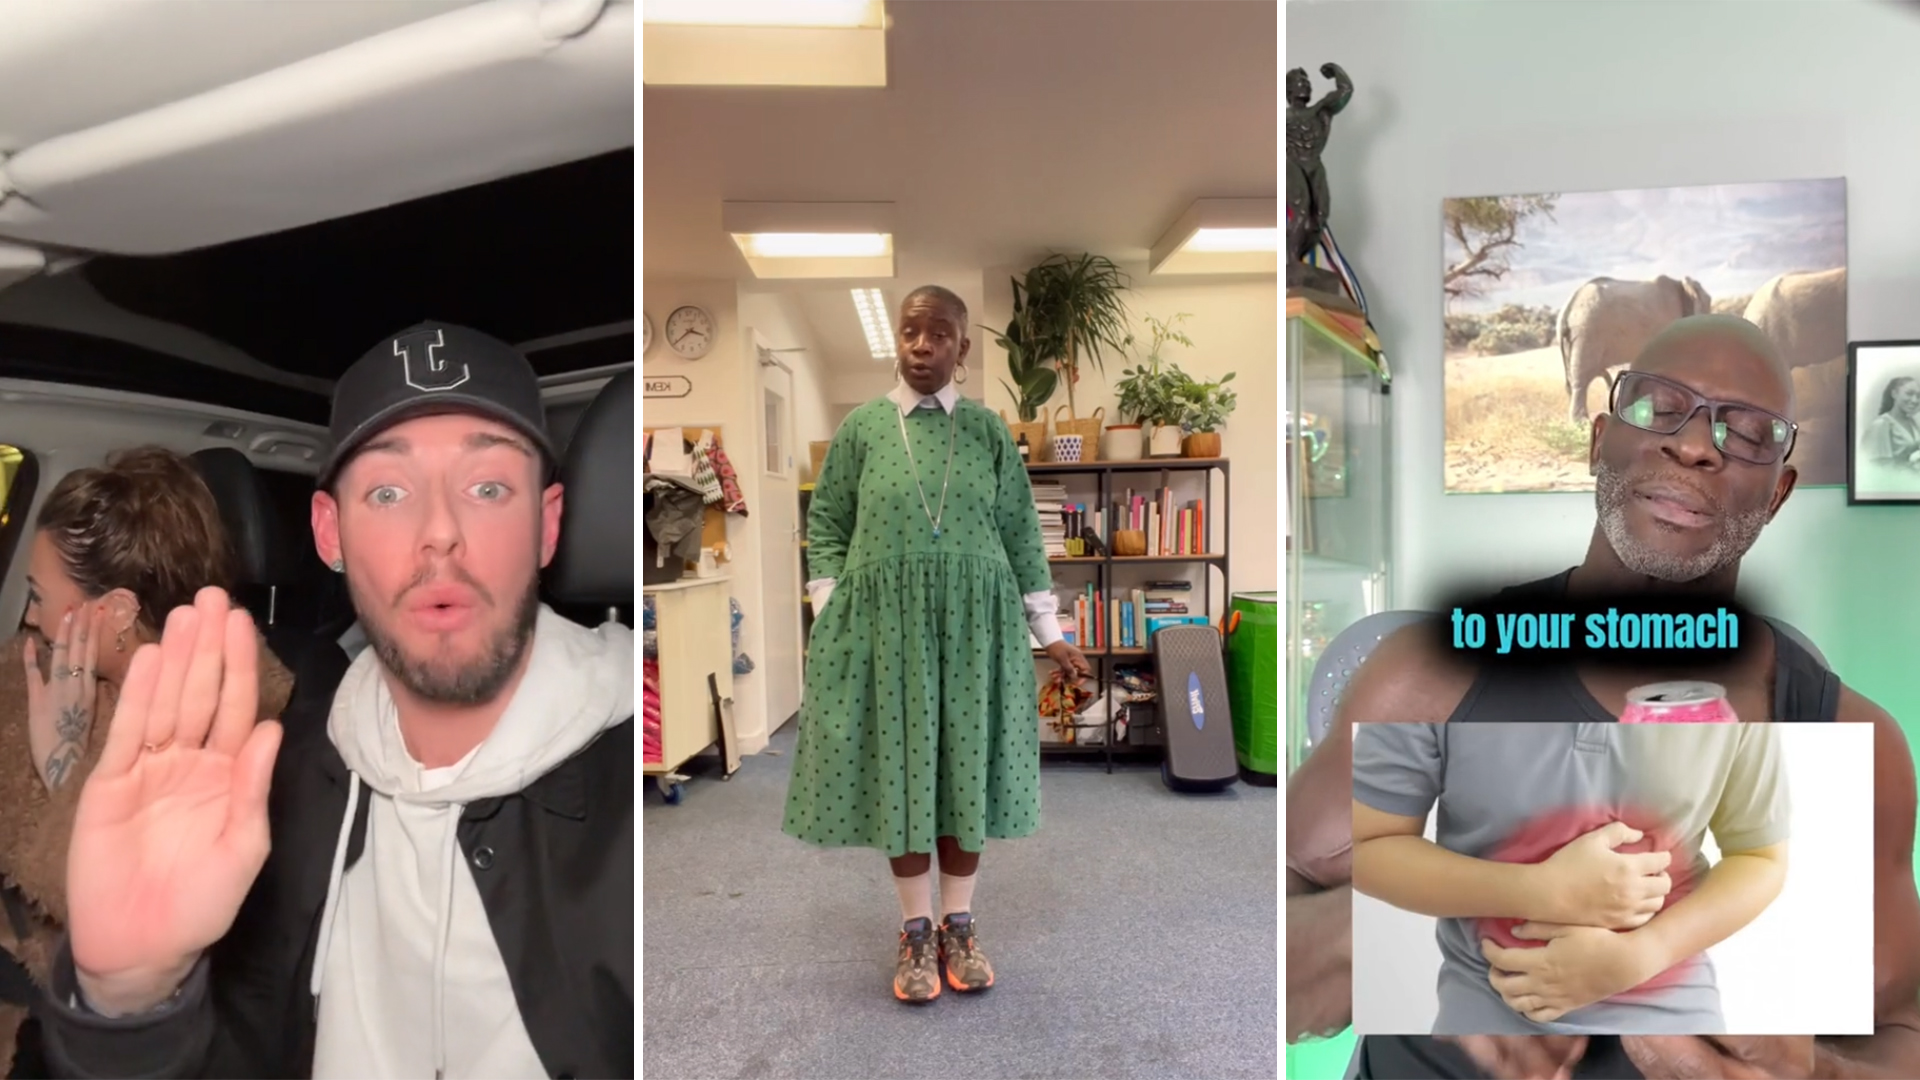 A collage showcasing three TikTok creators, each embodying 'TikTok Content Mastery' in their unique way. On the left, a man in a car gestures to the camera, in the center, a woman in a green dress stands confidently in an office, and on the right, a man discusses health, with text overlay 'to your stomach'. The diversity of content highlights the range of engaging material on the platform.